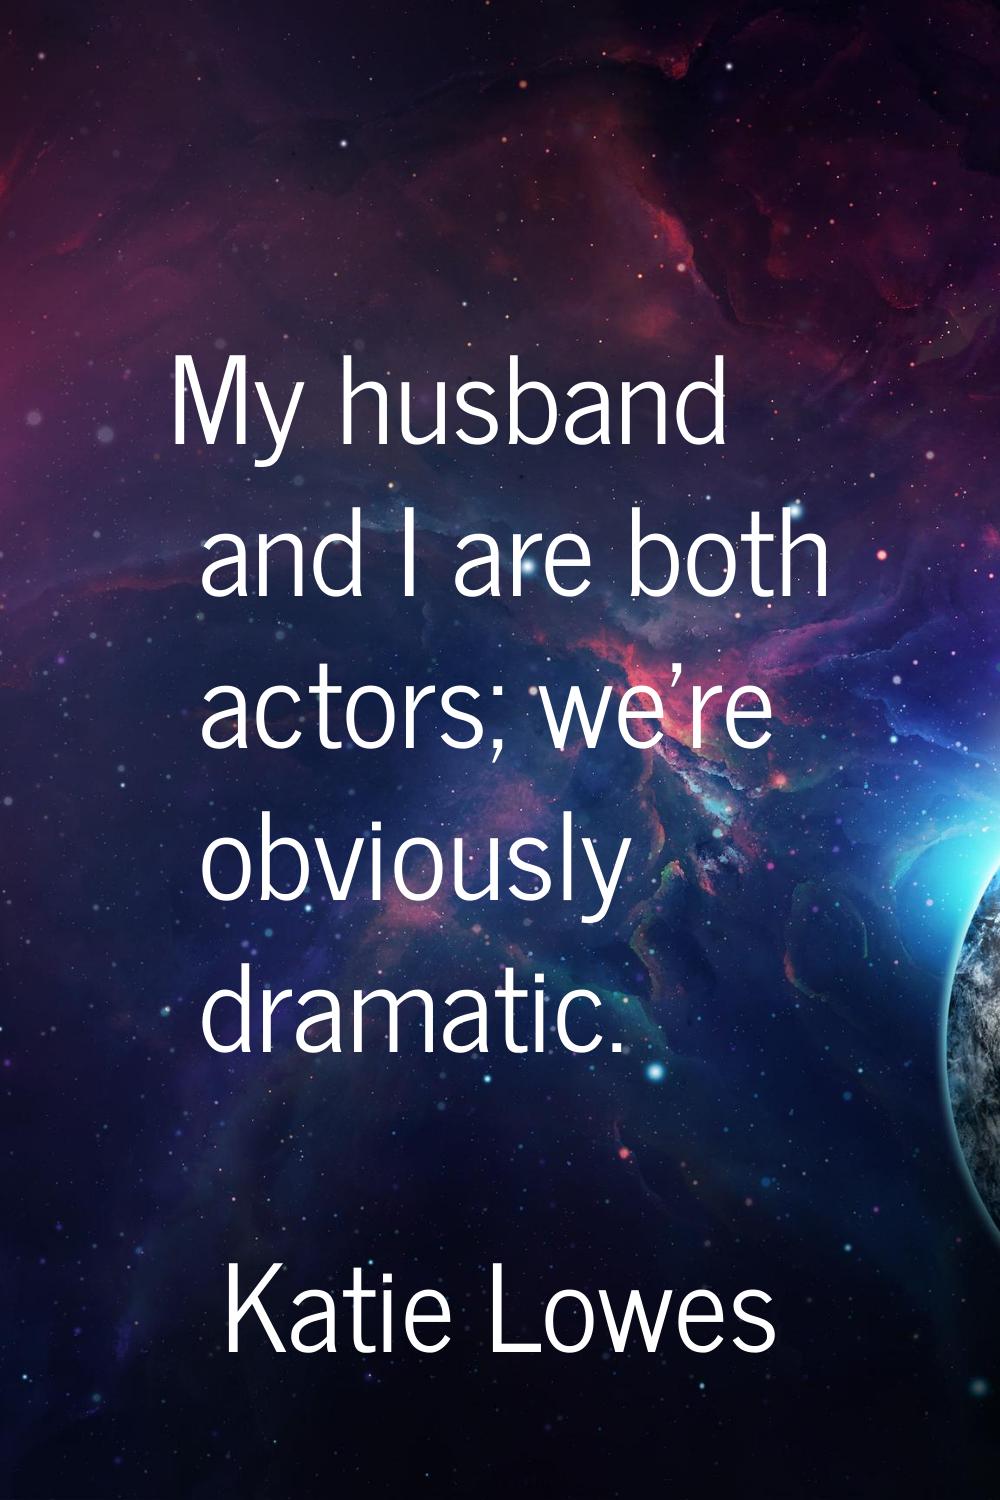 My husband and I are both actors; we're obviously dramatic.